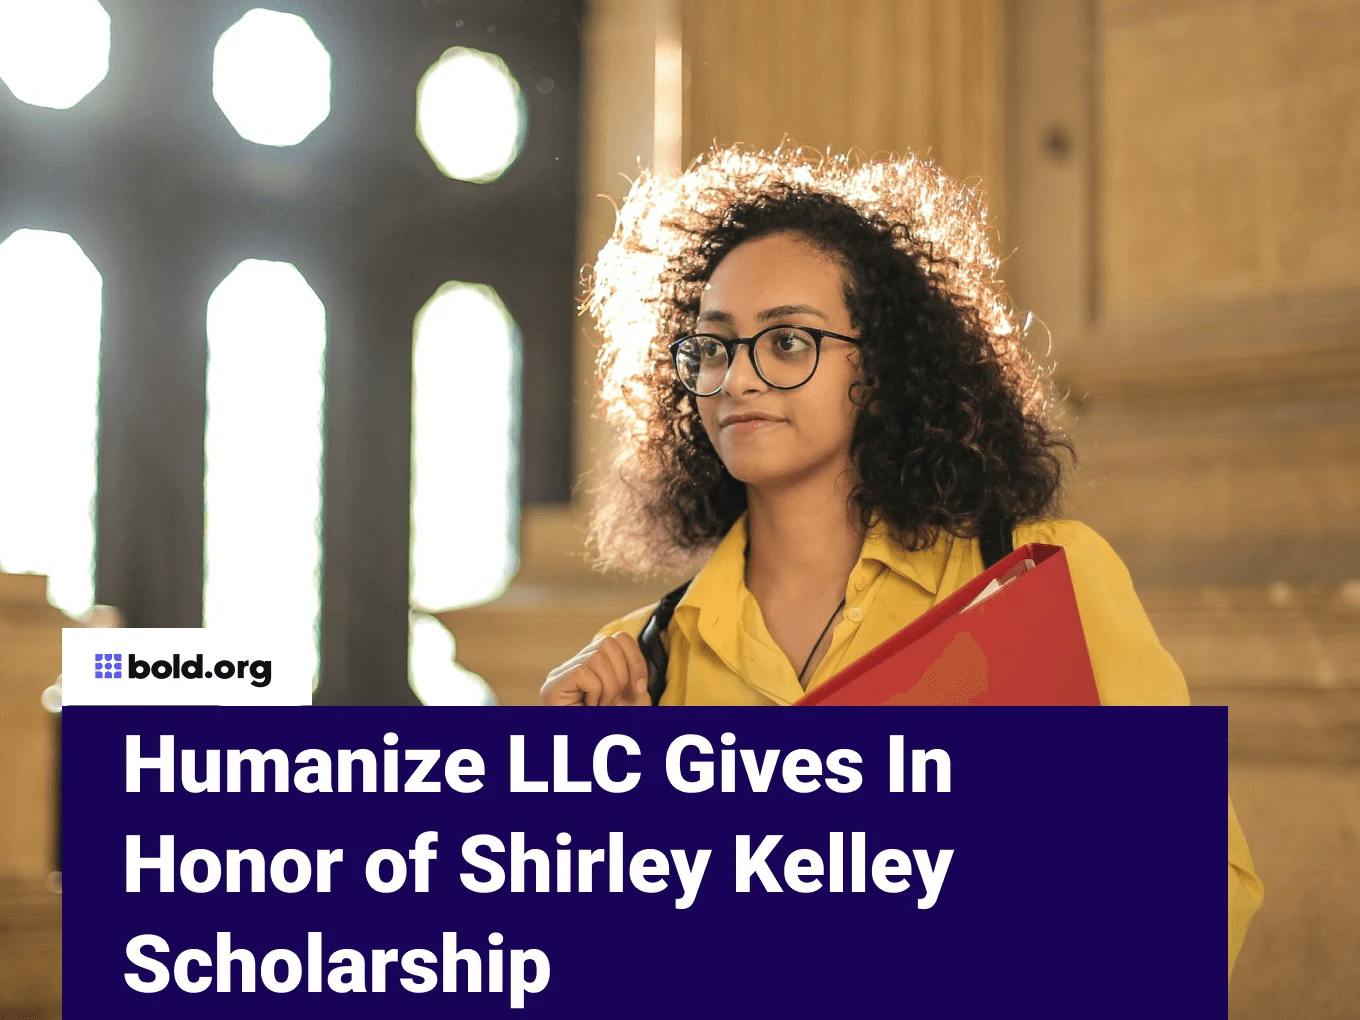 Humanize LLC Gives In Honor of Shirley Kelley Scholarship